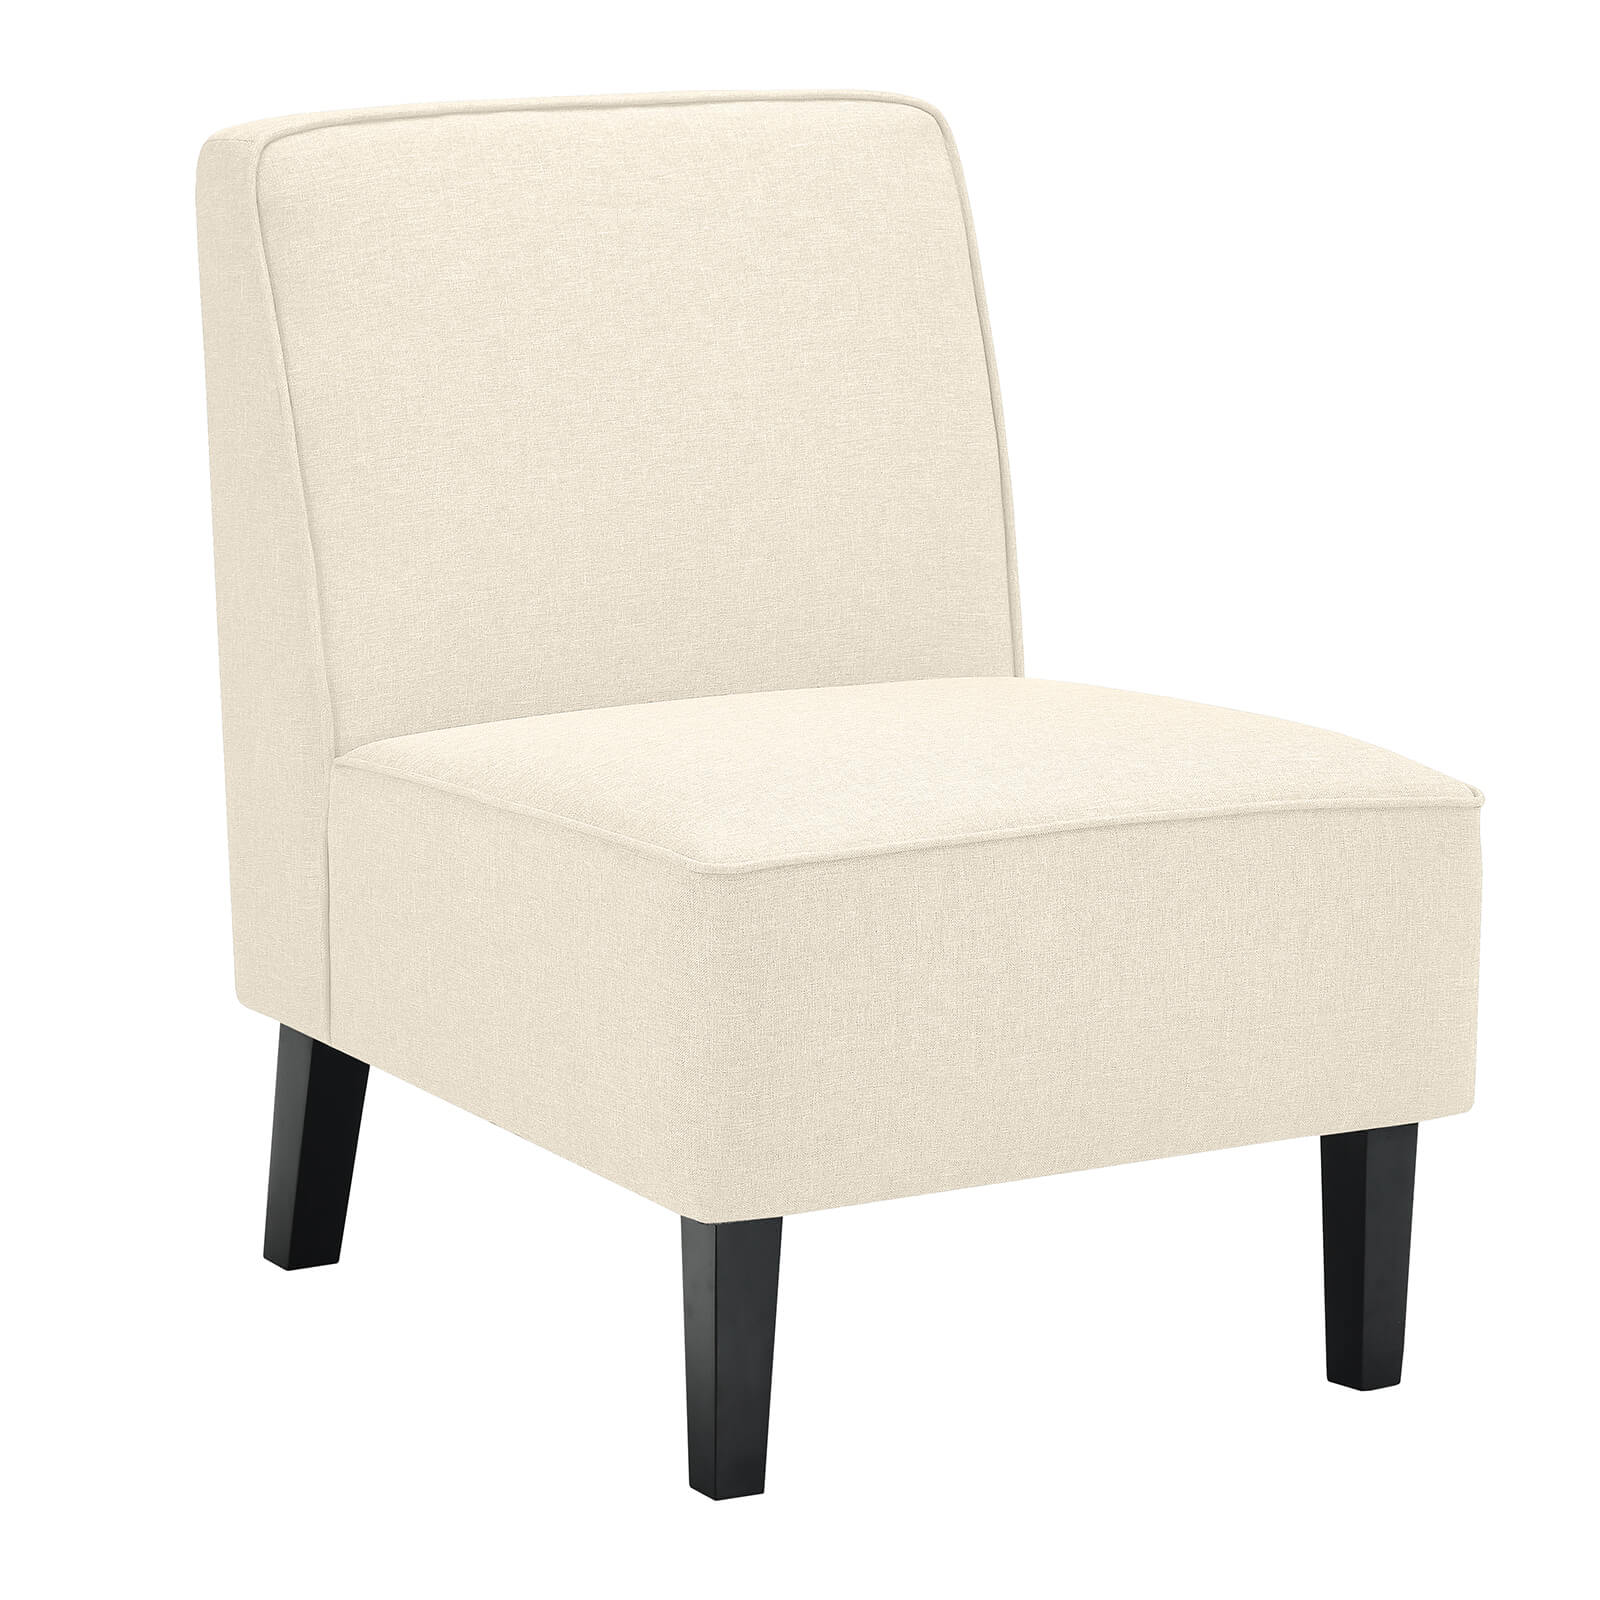 Linen Fabric Upholstered Armless Accent Chair with Rubber Wood Legs-Beige